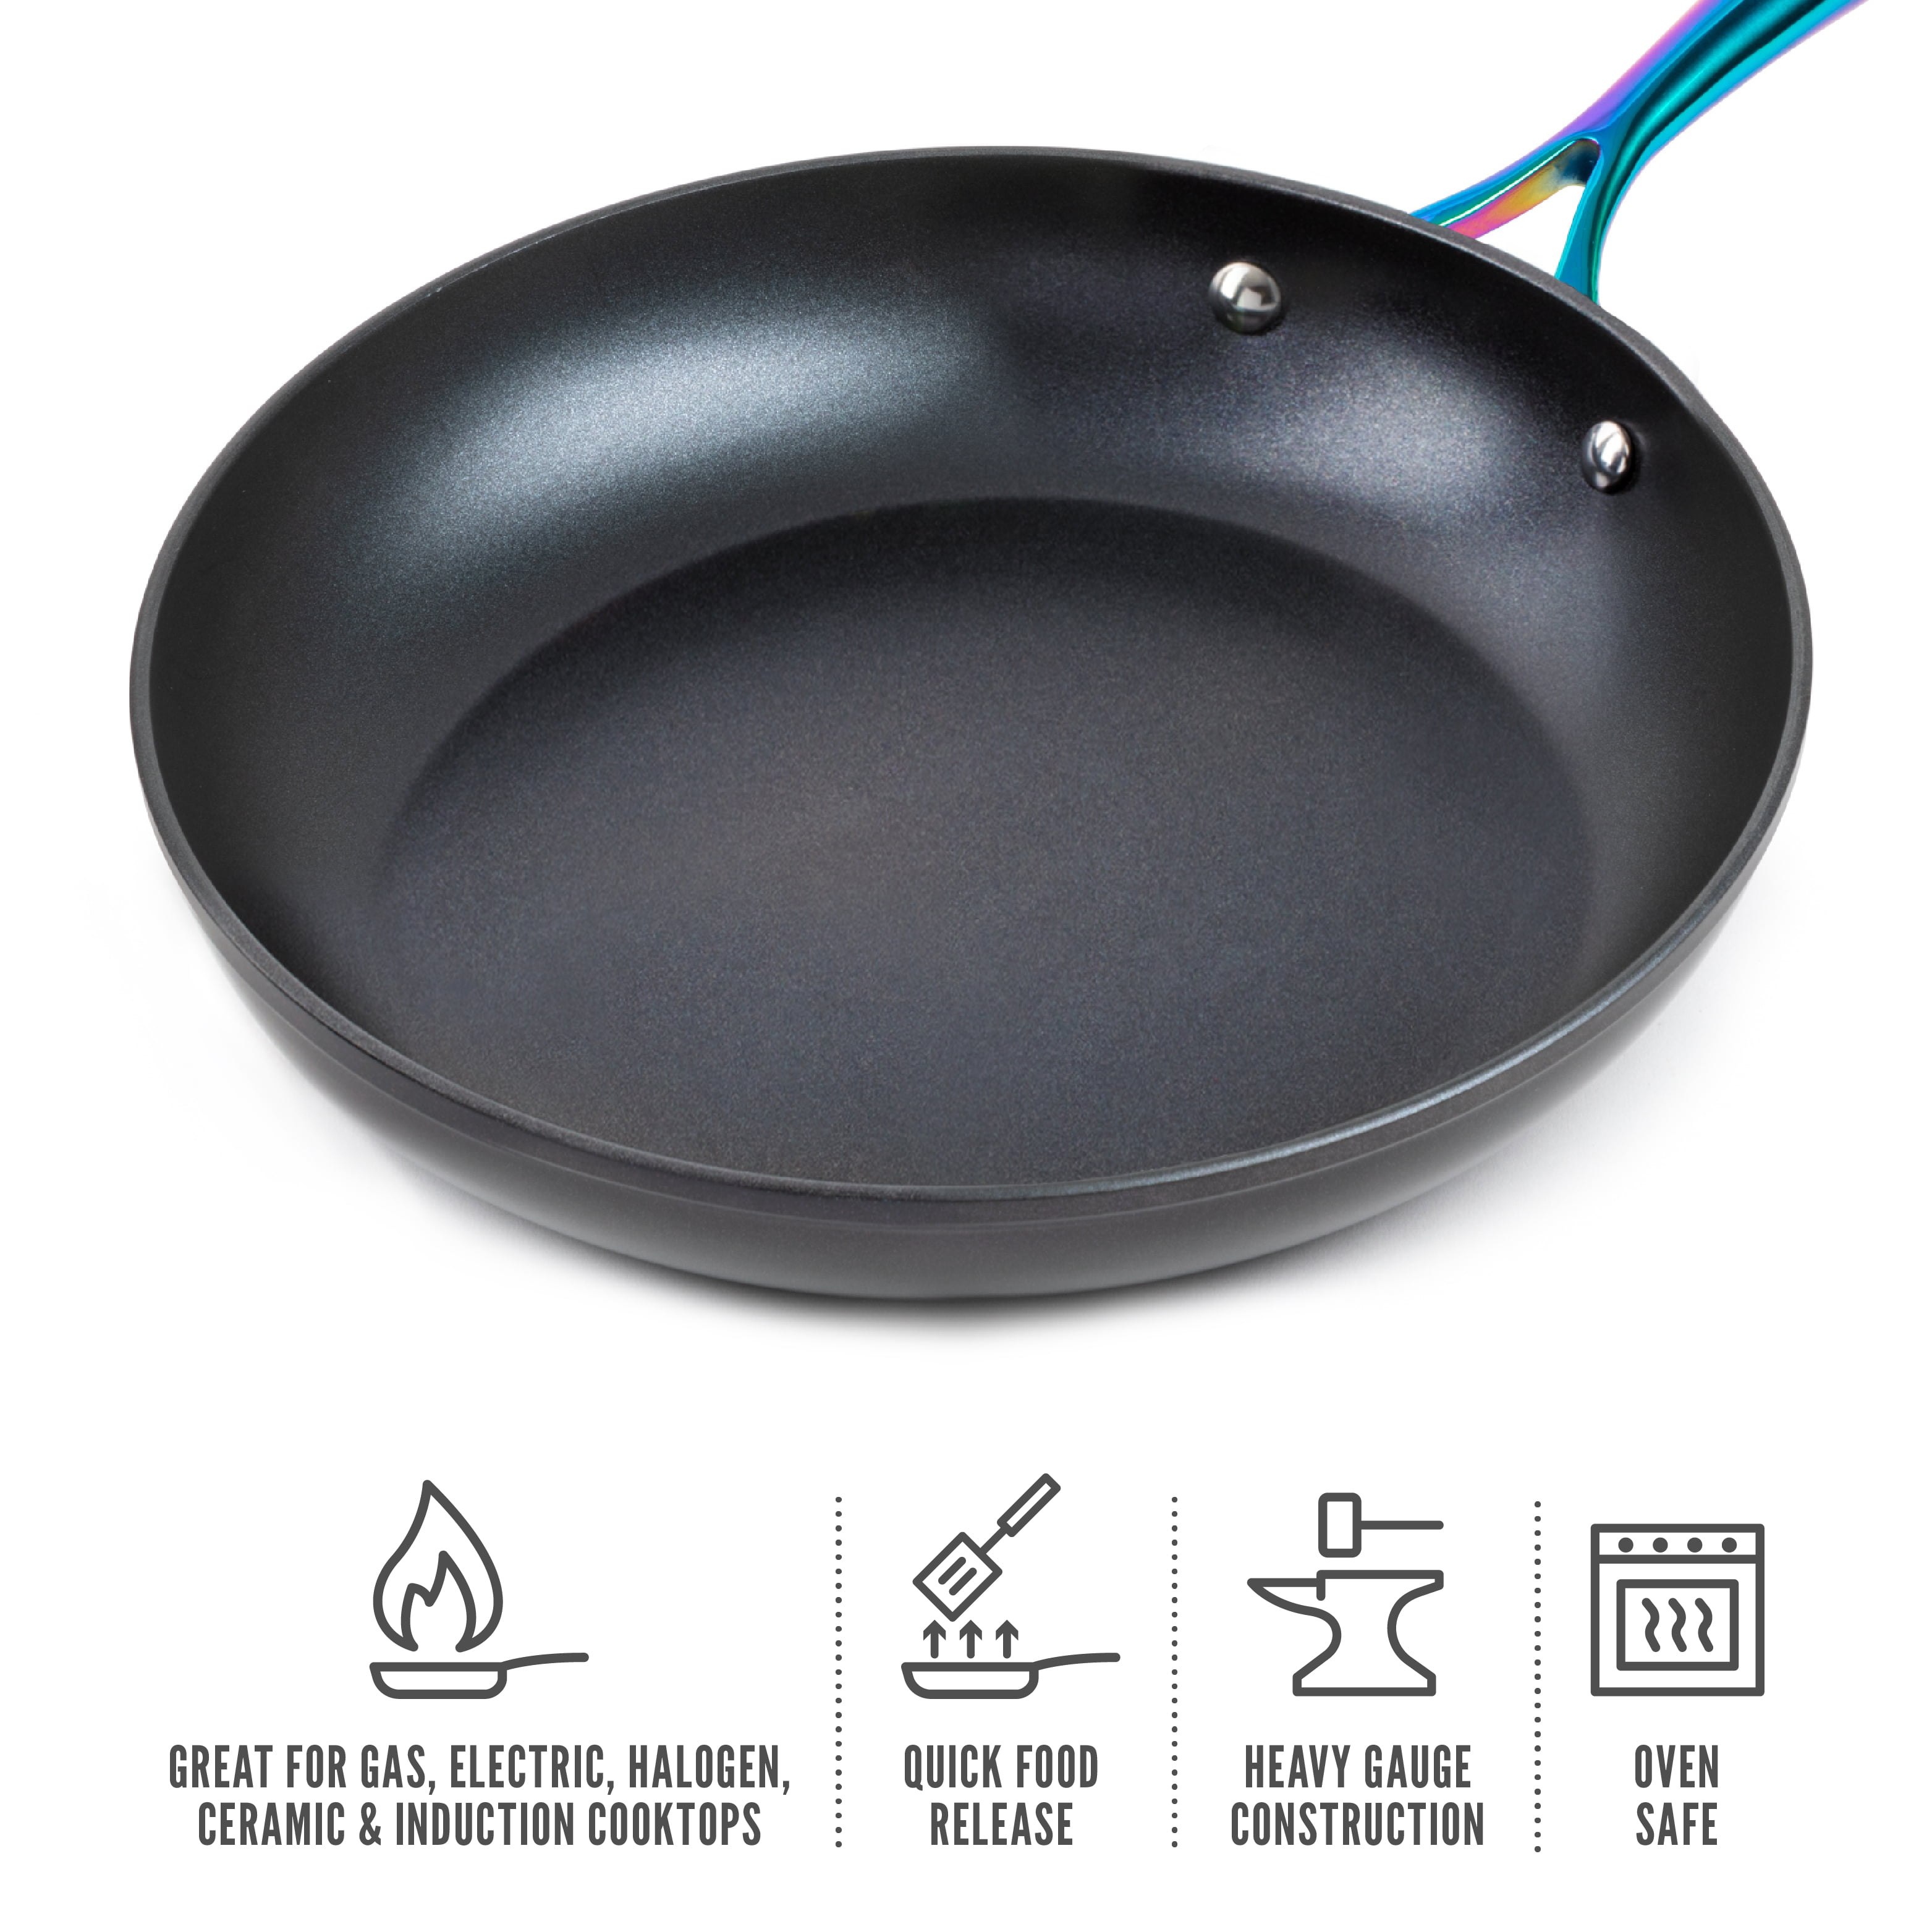 Basics 3-Piece Non-Stick Fry Pan Set, 8 inch, 10 inch, and 12 inch